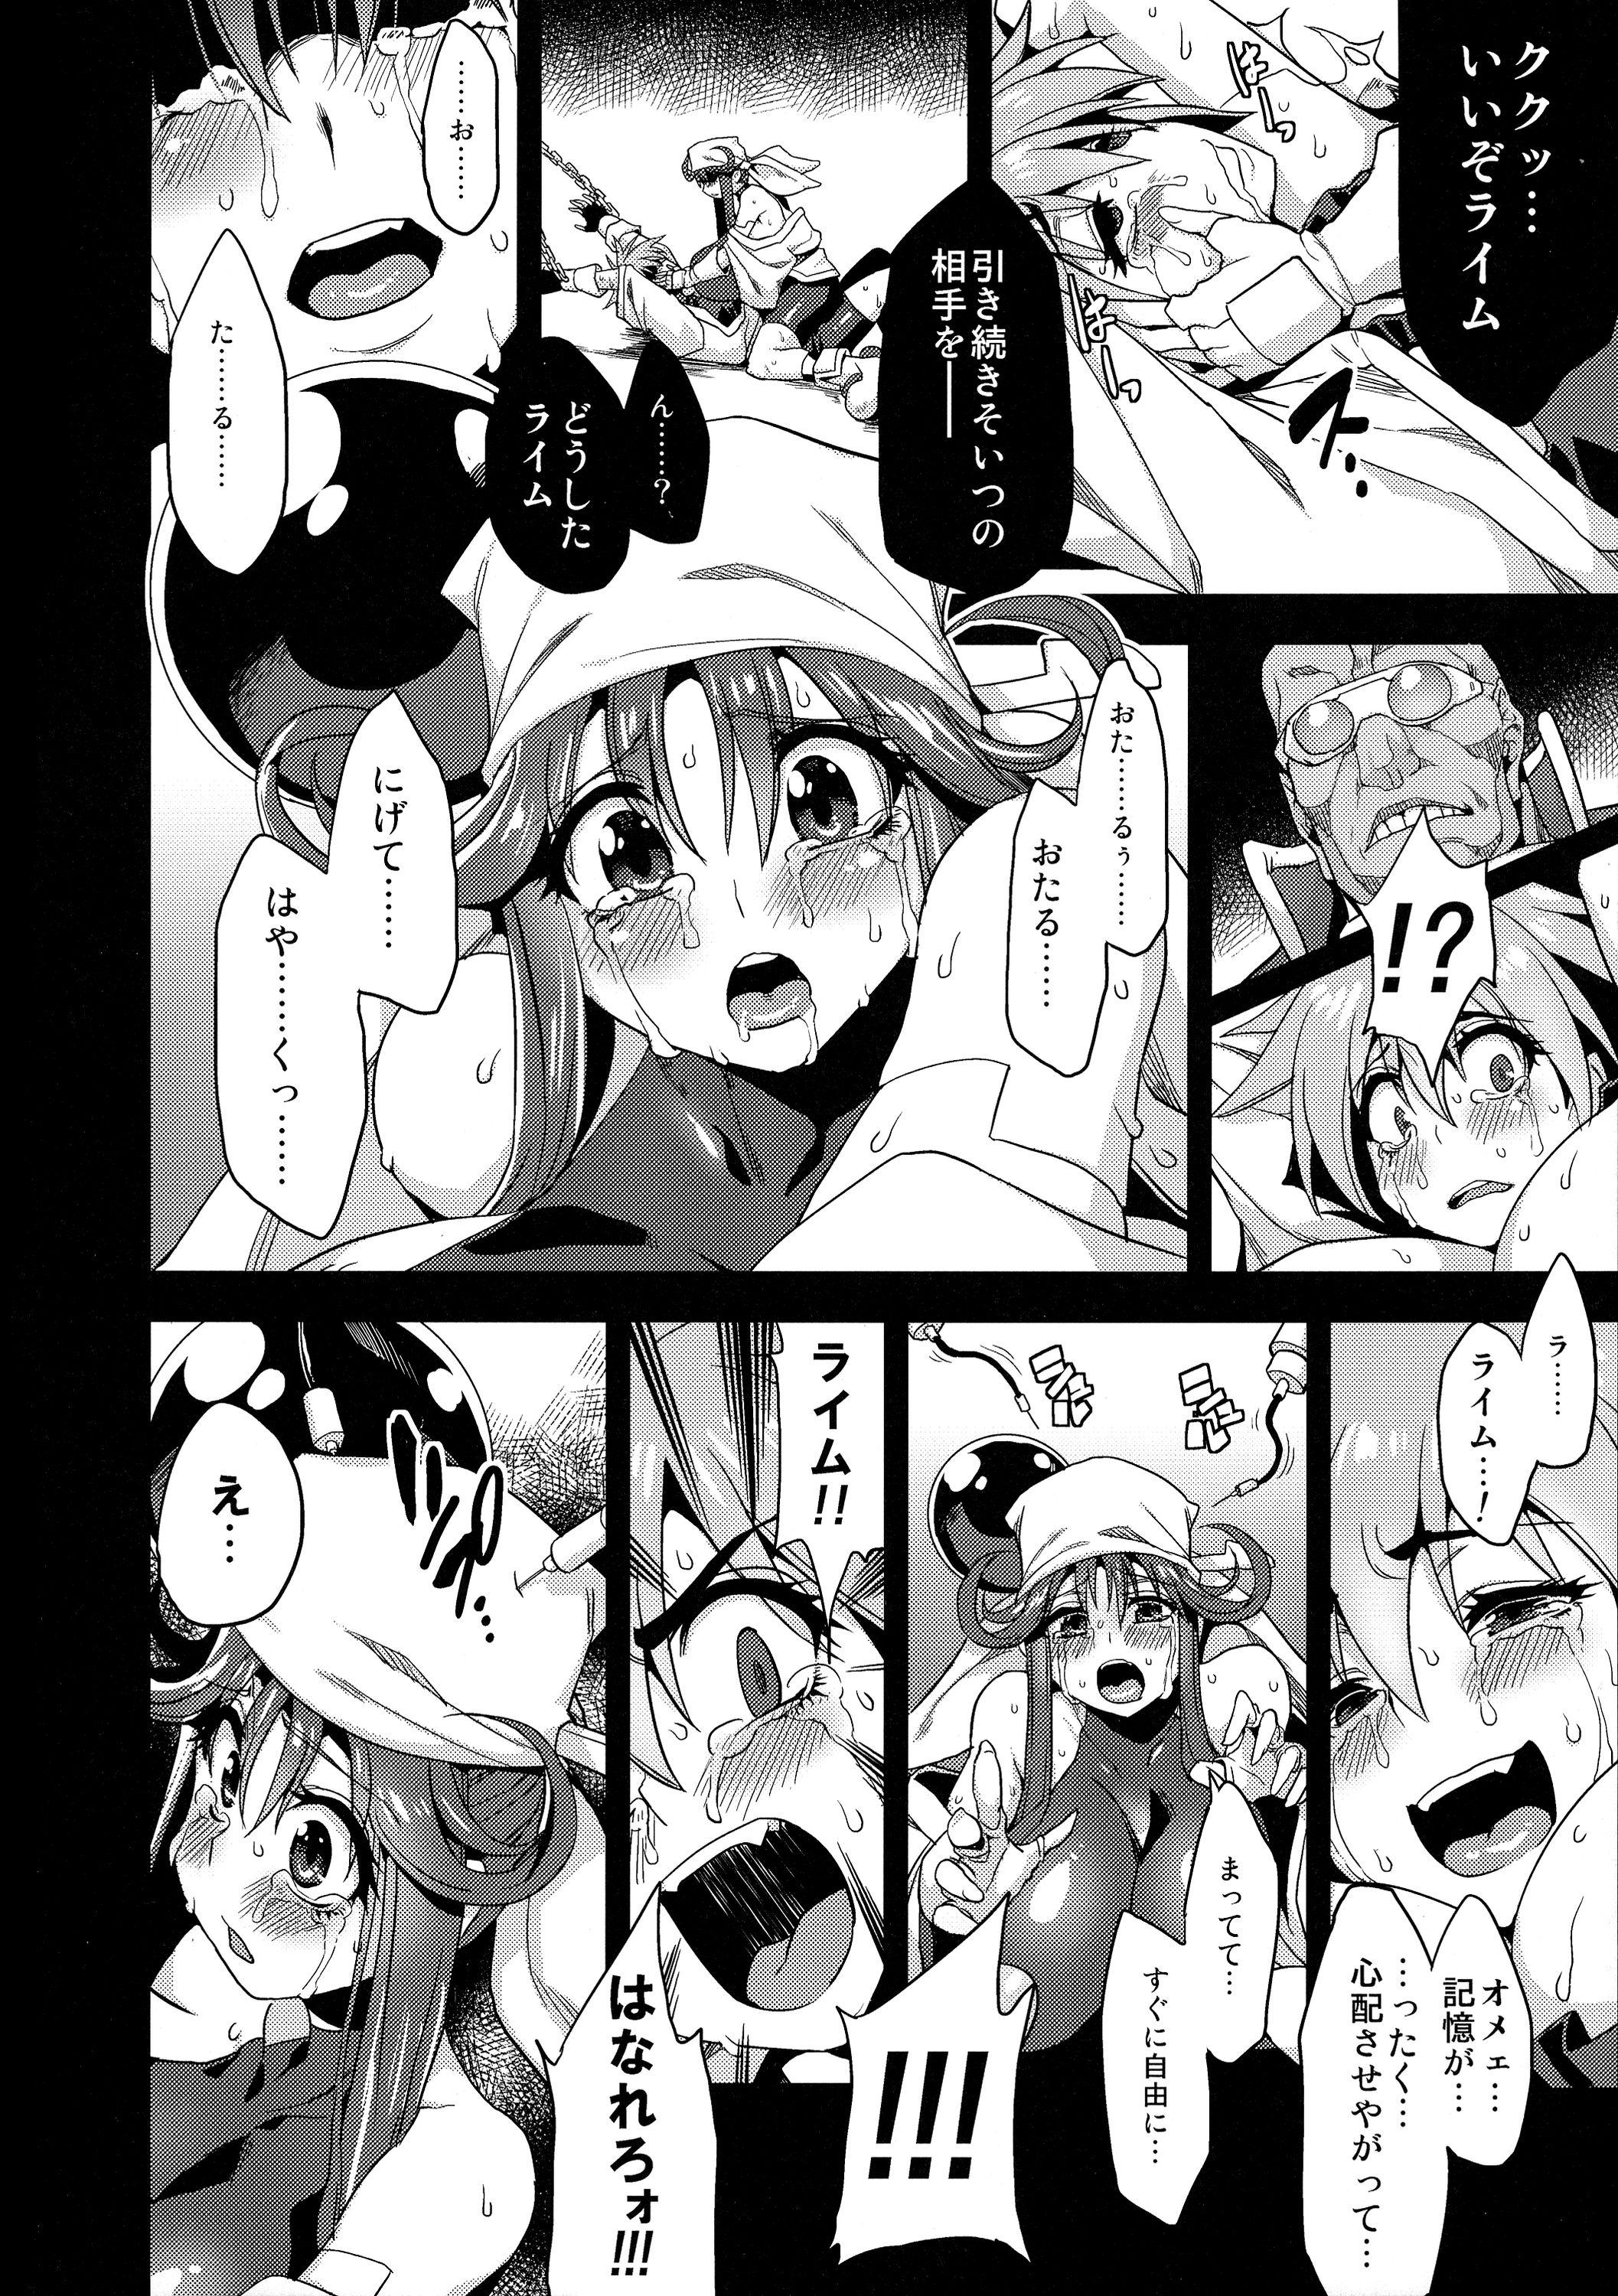 Gang Hentai Marionette 3 - Saber marionette HD - Page 10